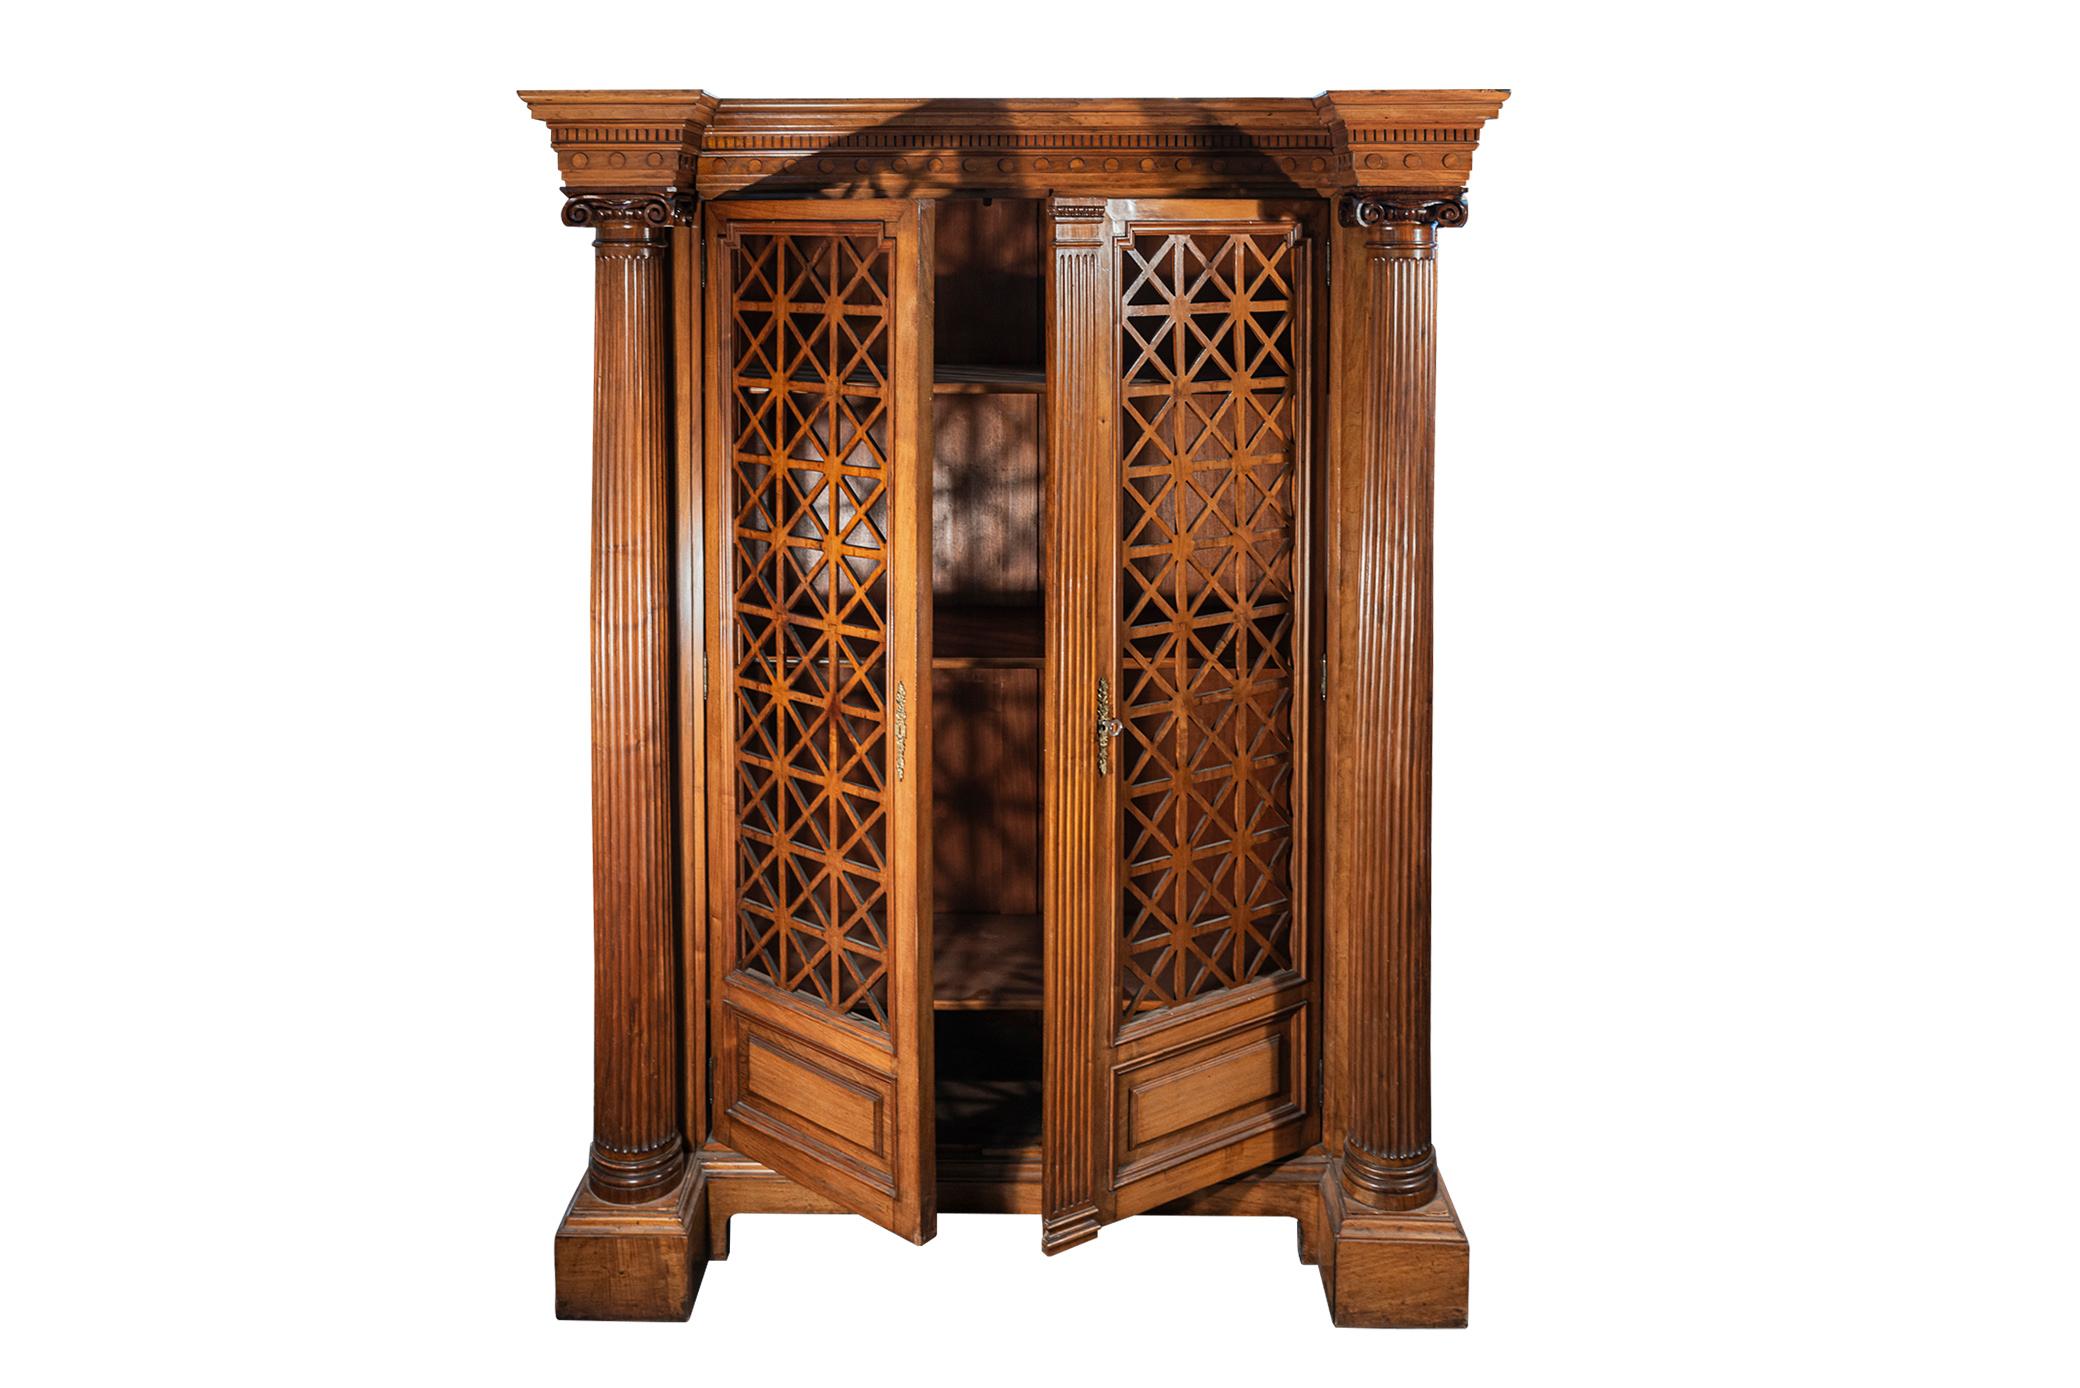 Bookcase in the style of Kerylos, 
Neoclassical lattice doors in the shape of the antique,
Corinthians capitals columns,
Wood,
France, circa 1930.

Measures: Width 131 cm, depth 60 cm, height 170 cm.